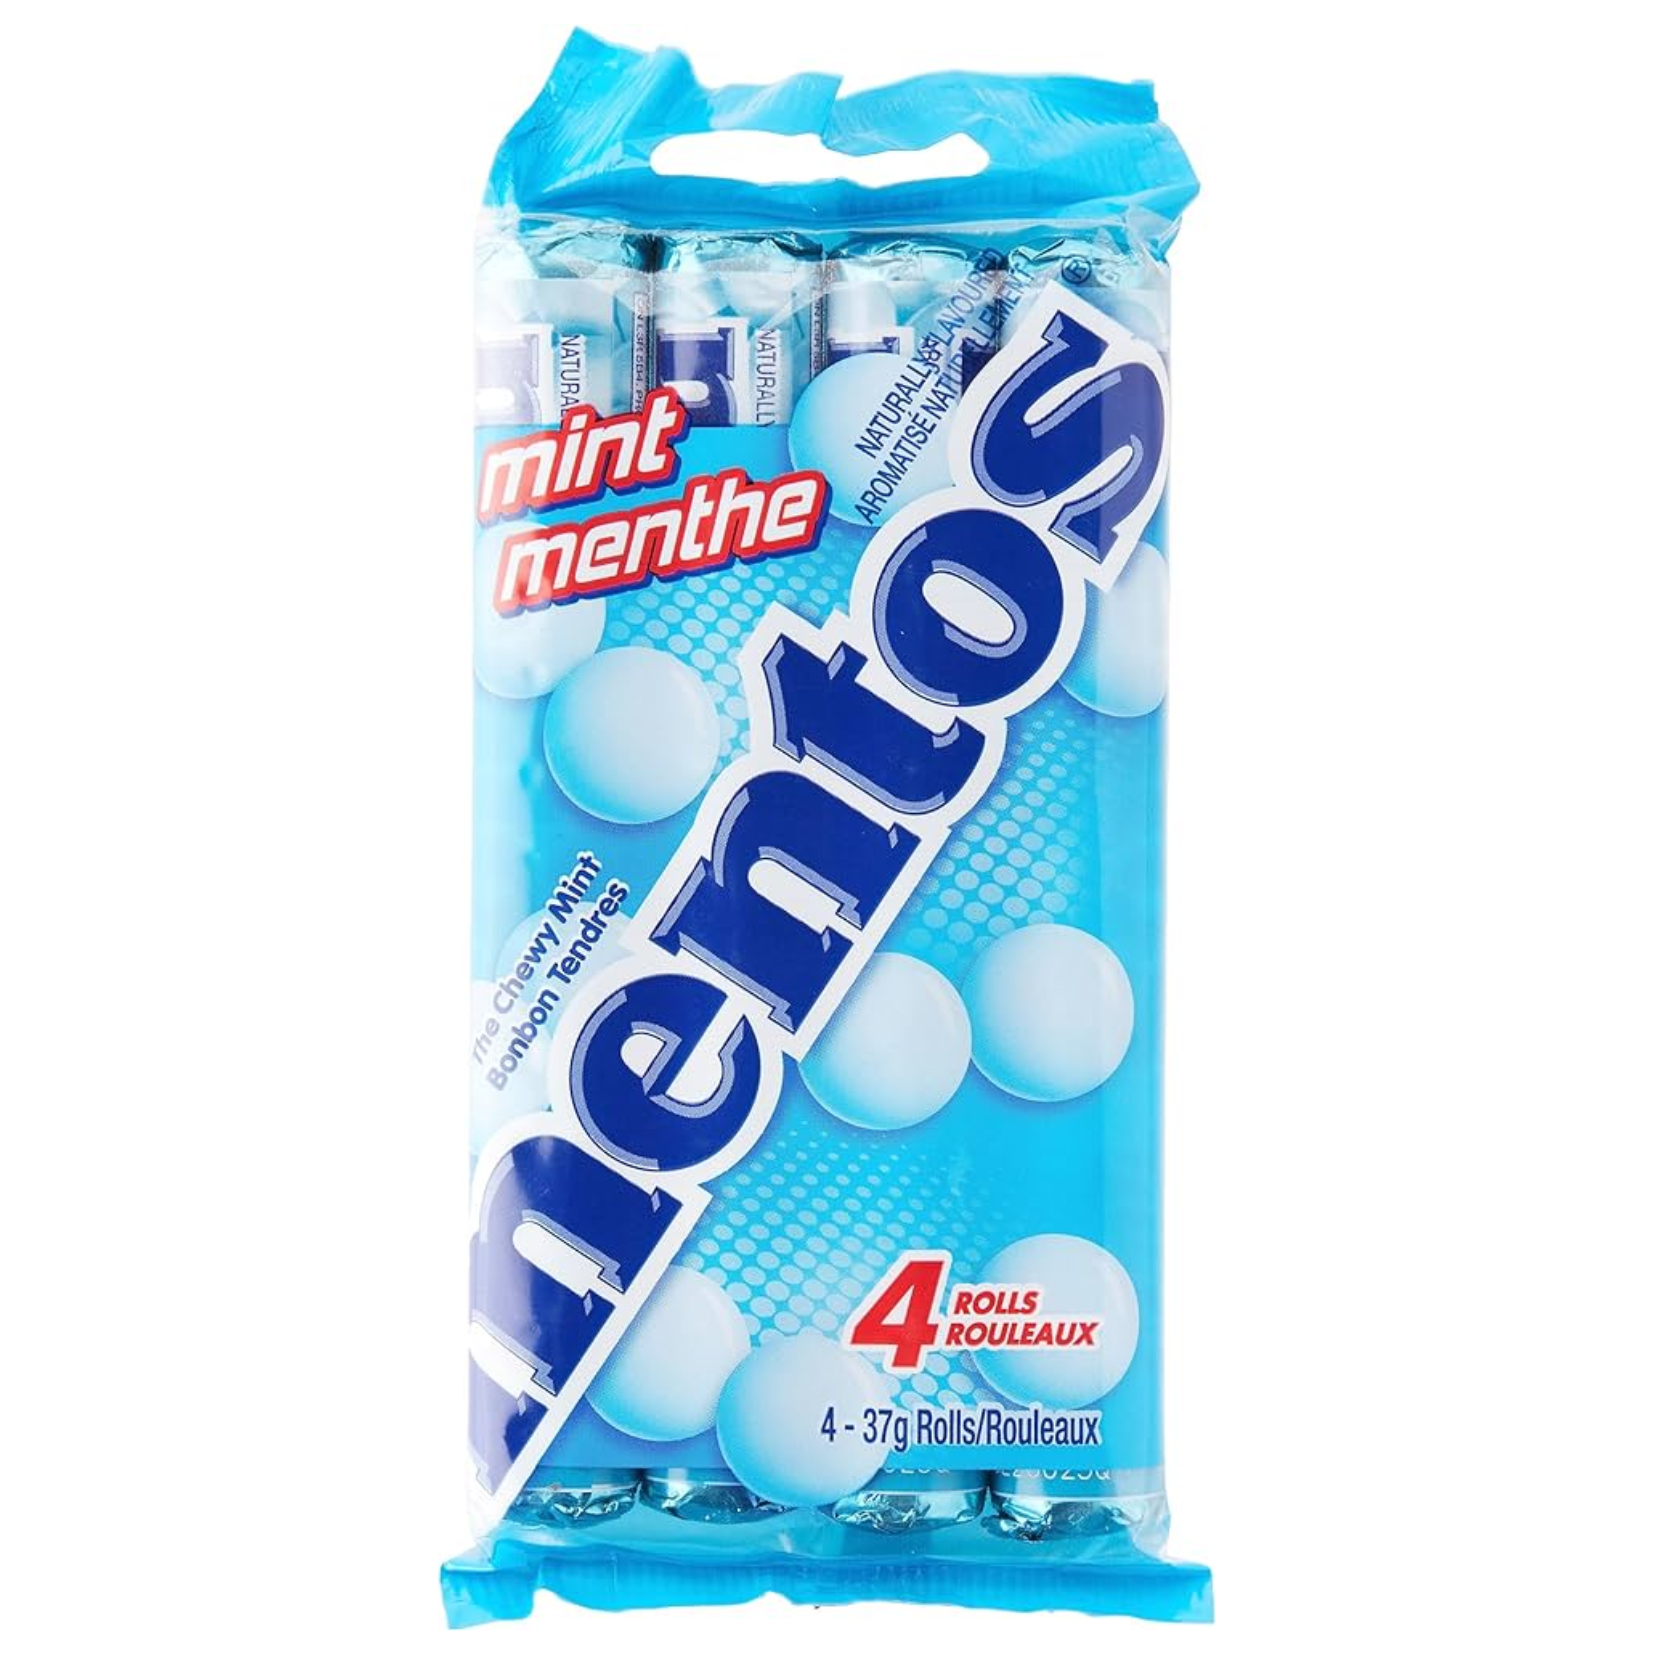 Mentos Chewy Mints 37g x 4